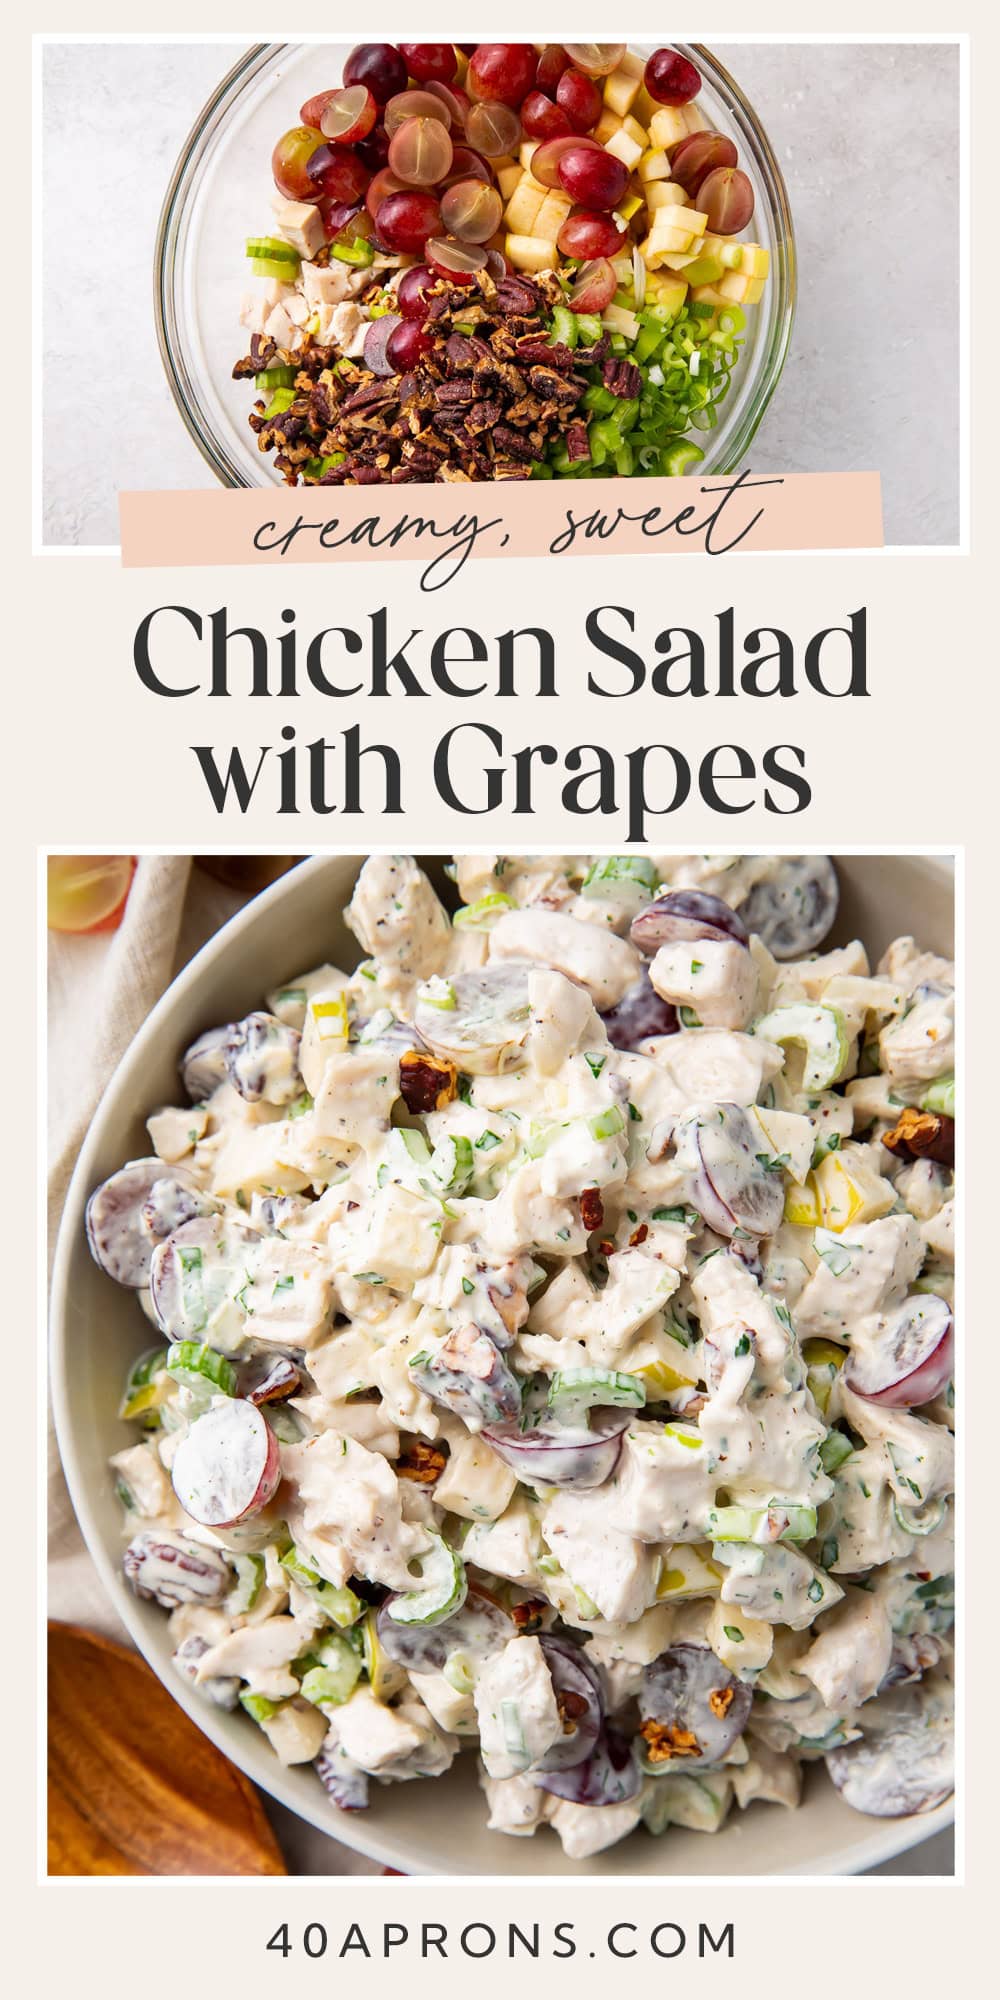 Pin graphic for chicken salad with grapes.